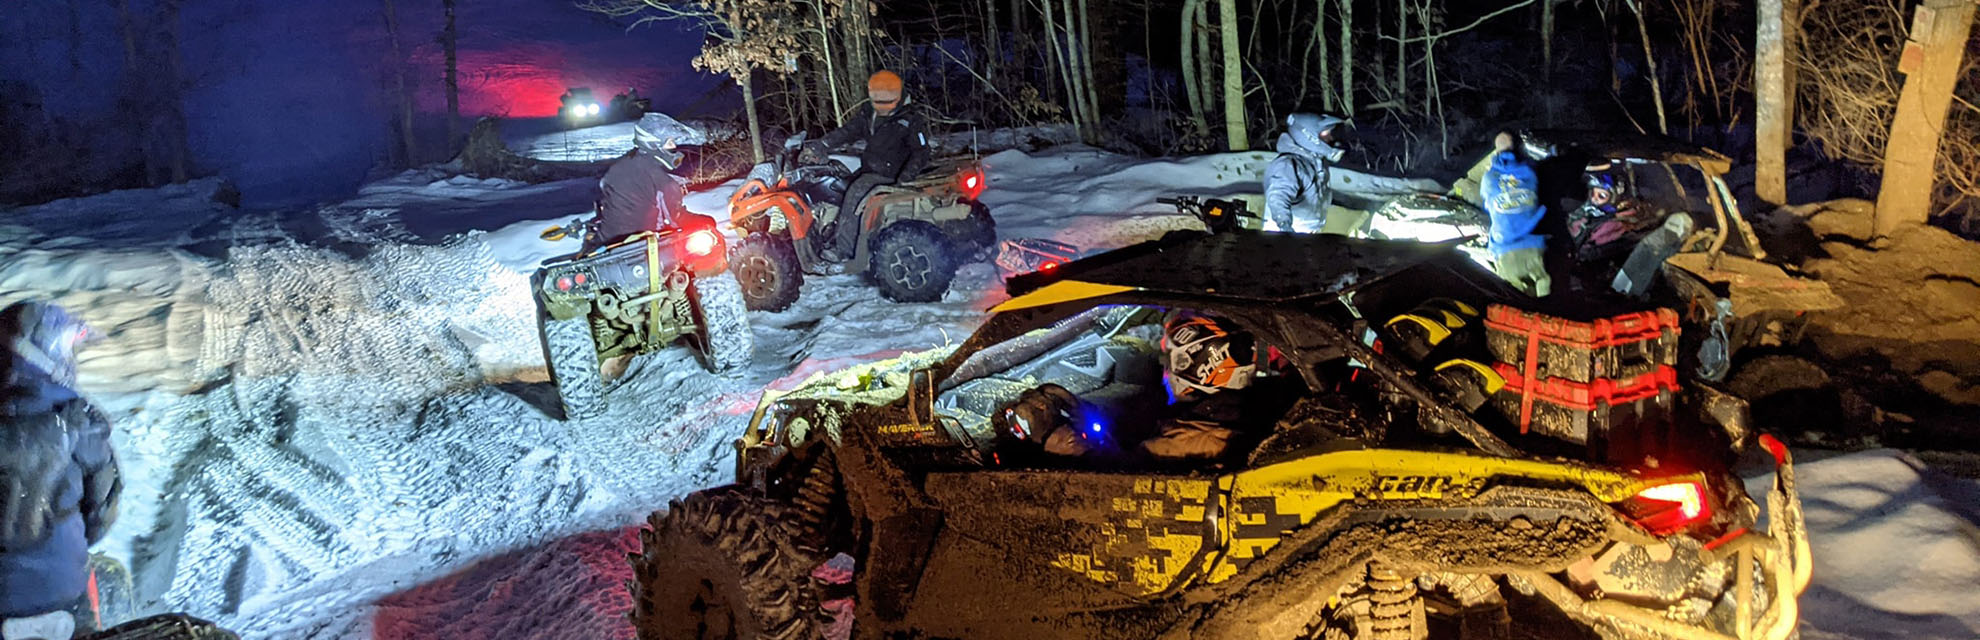 Winter ATV riders at Tecumseh Trails in Perry County, Ohio